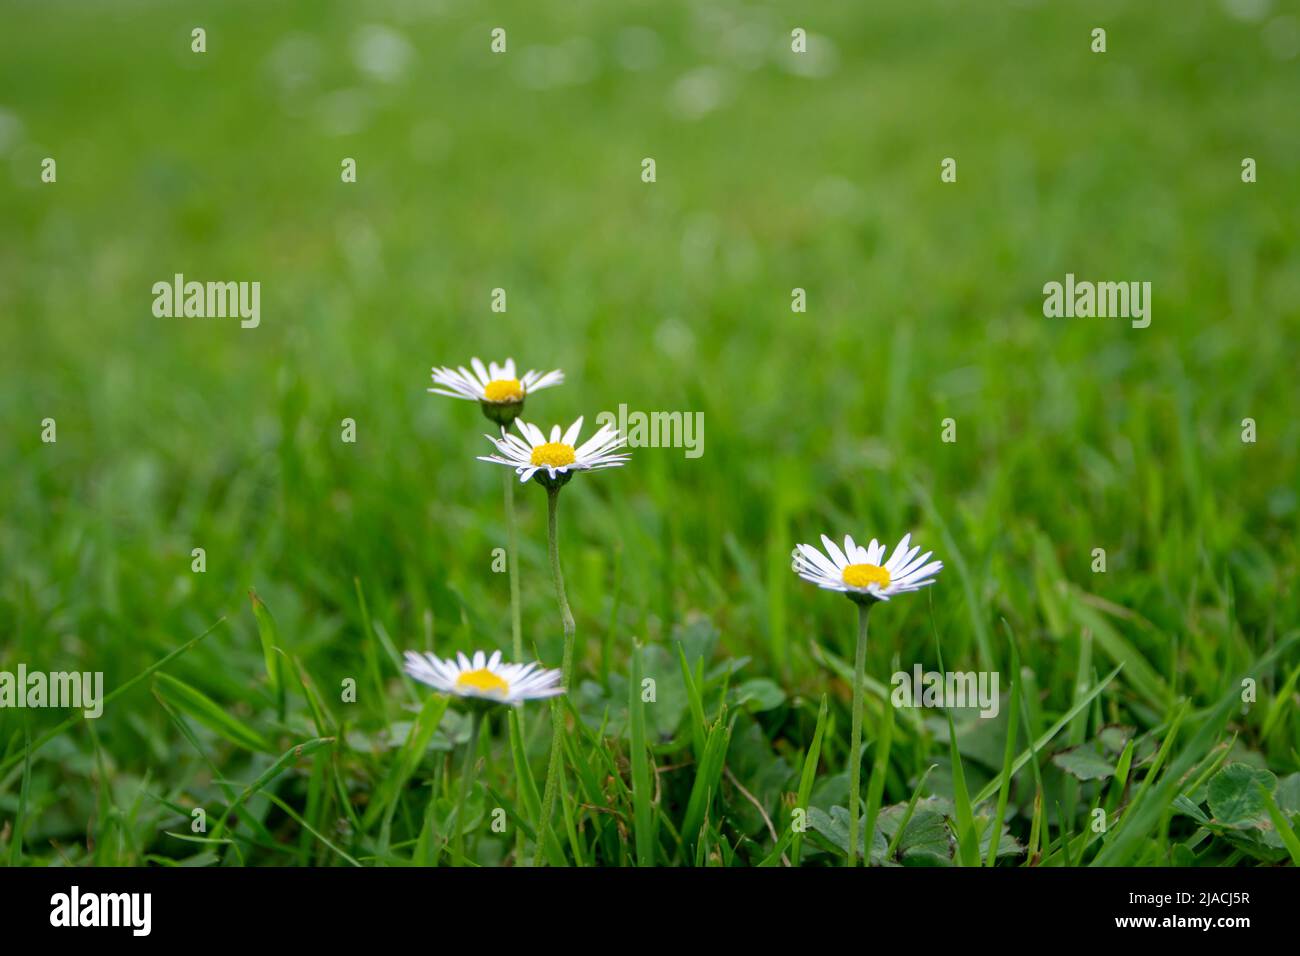 Daisy or bellis perennis white flowers with yellow center on the green meadow in the spring Stock Photo